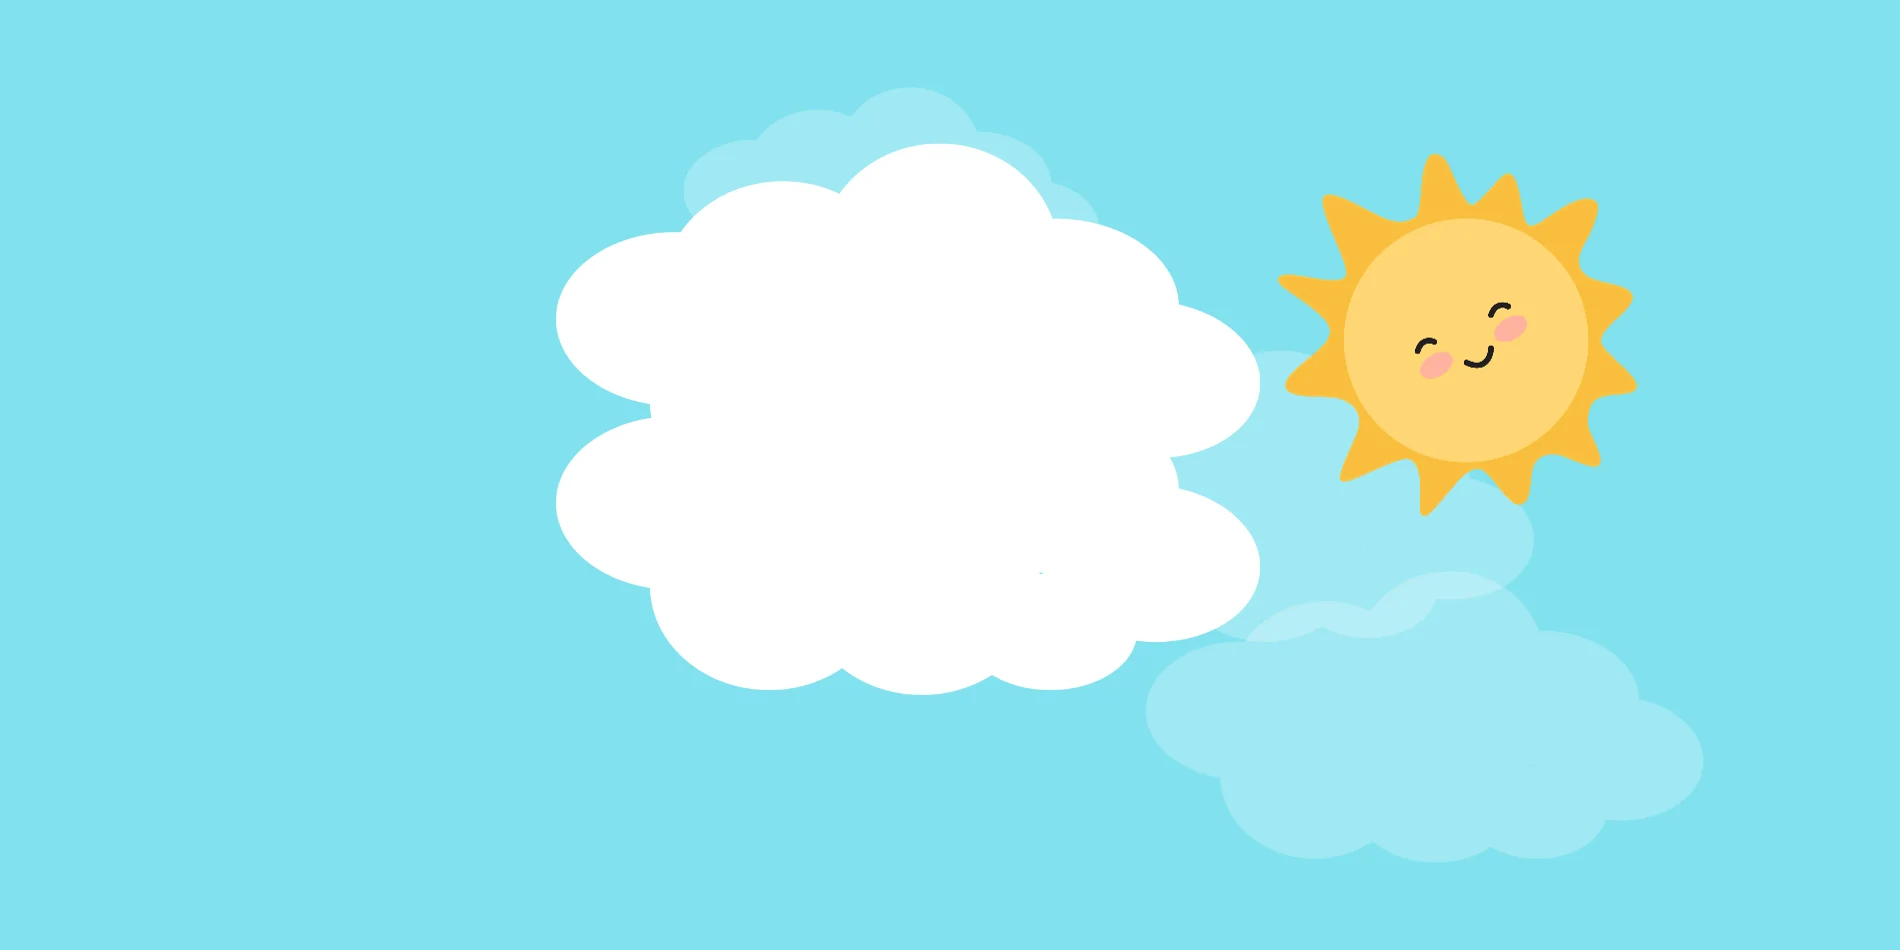 An illustration of a smiling sun by some clouds.